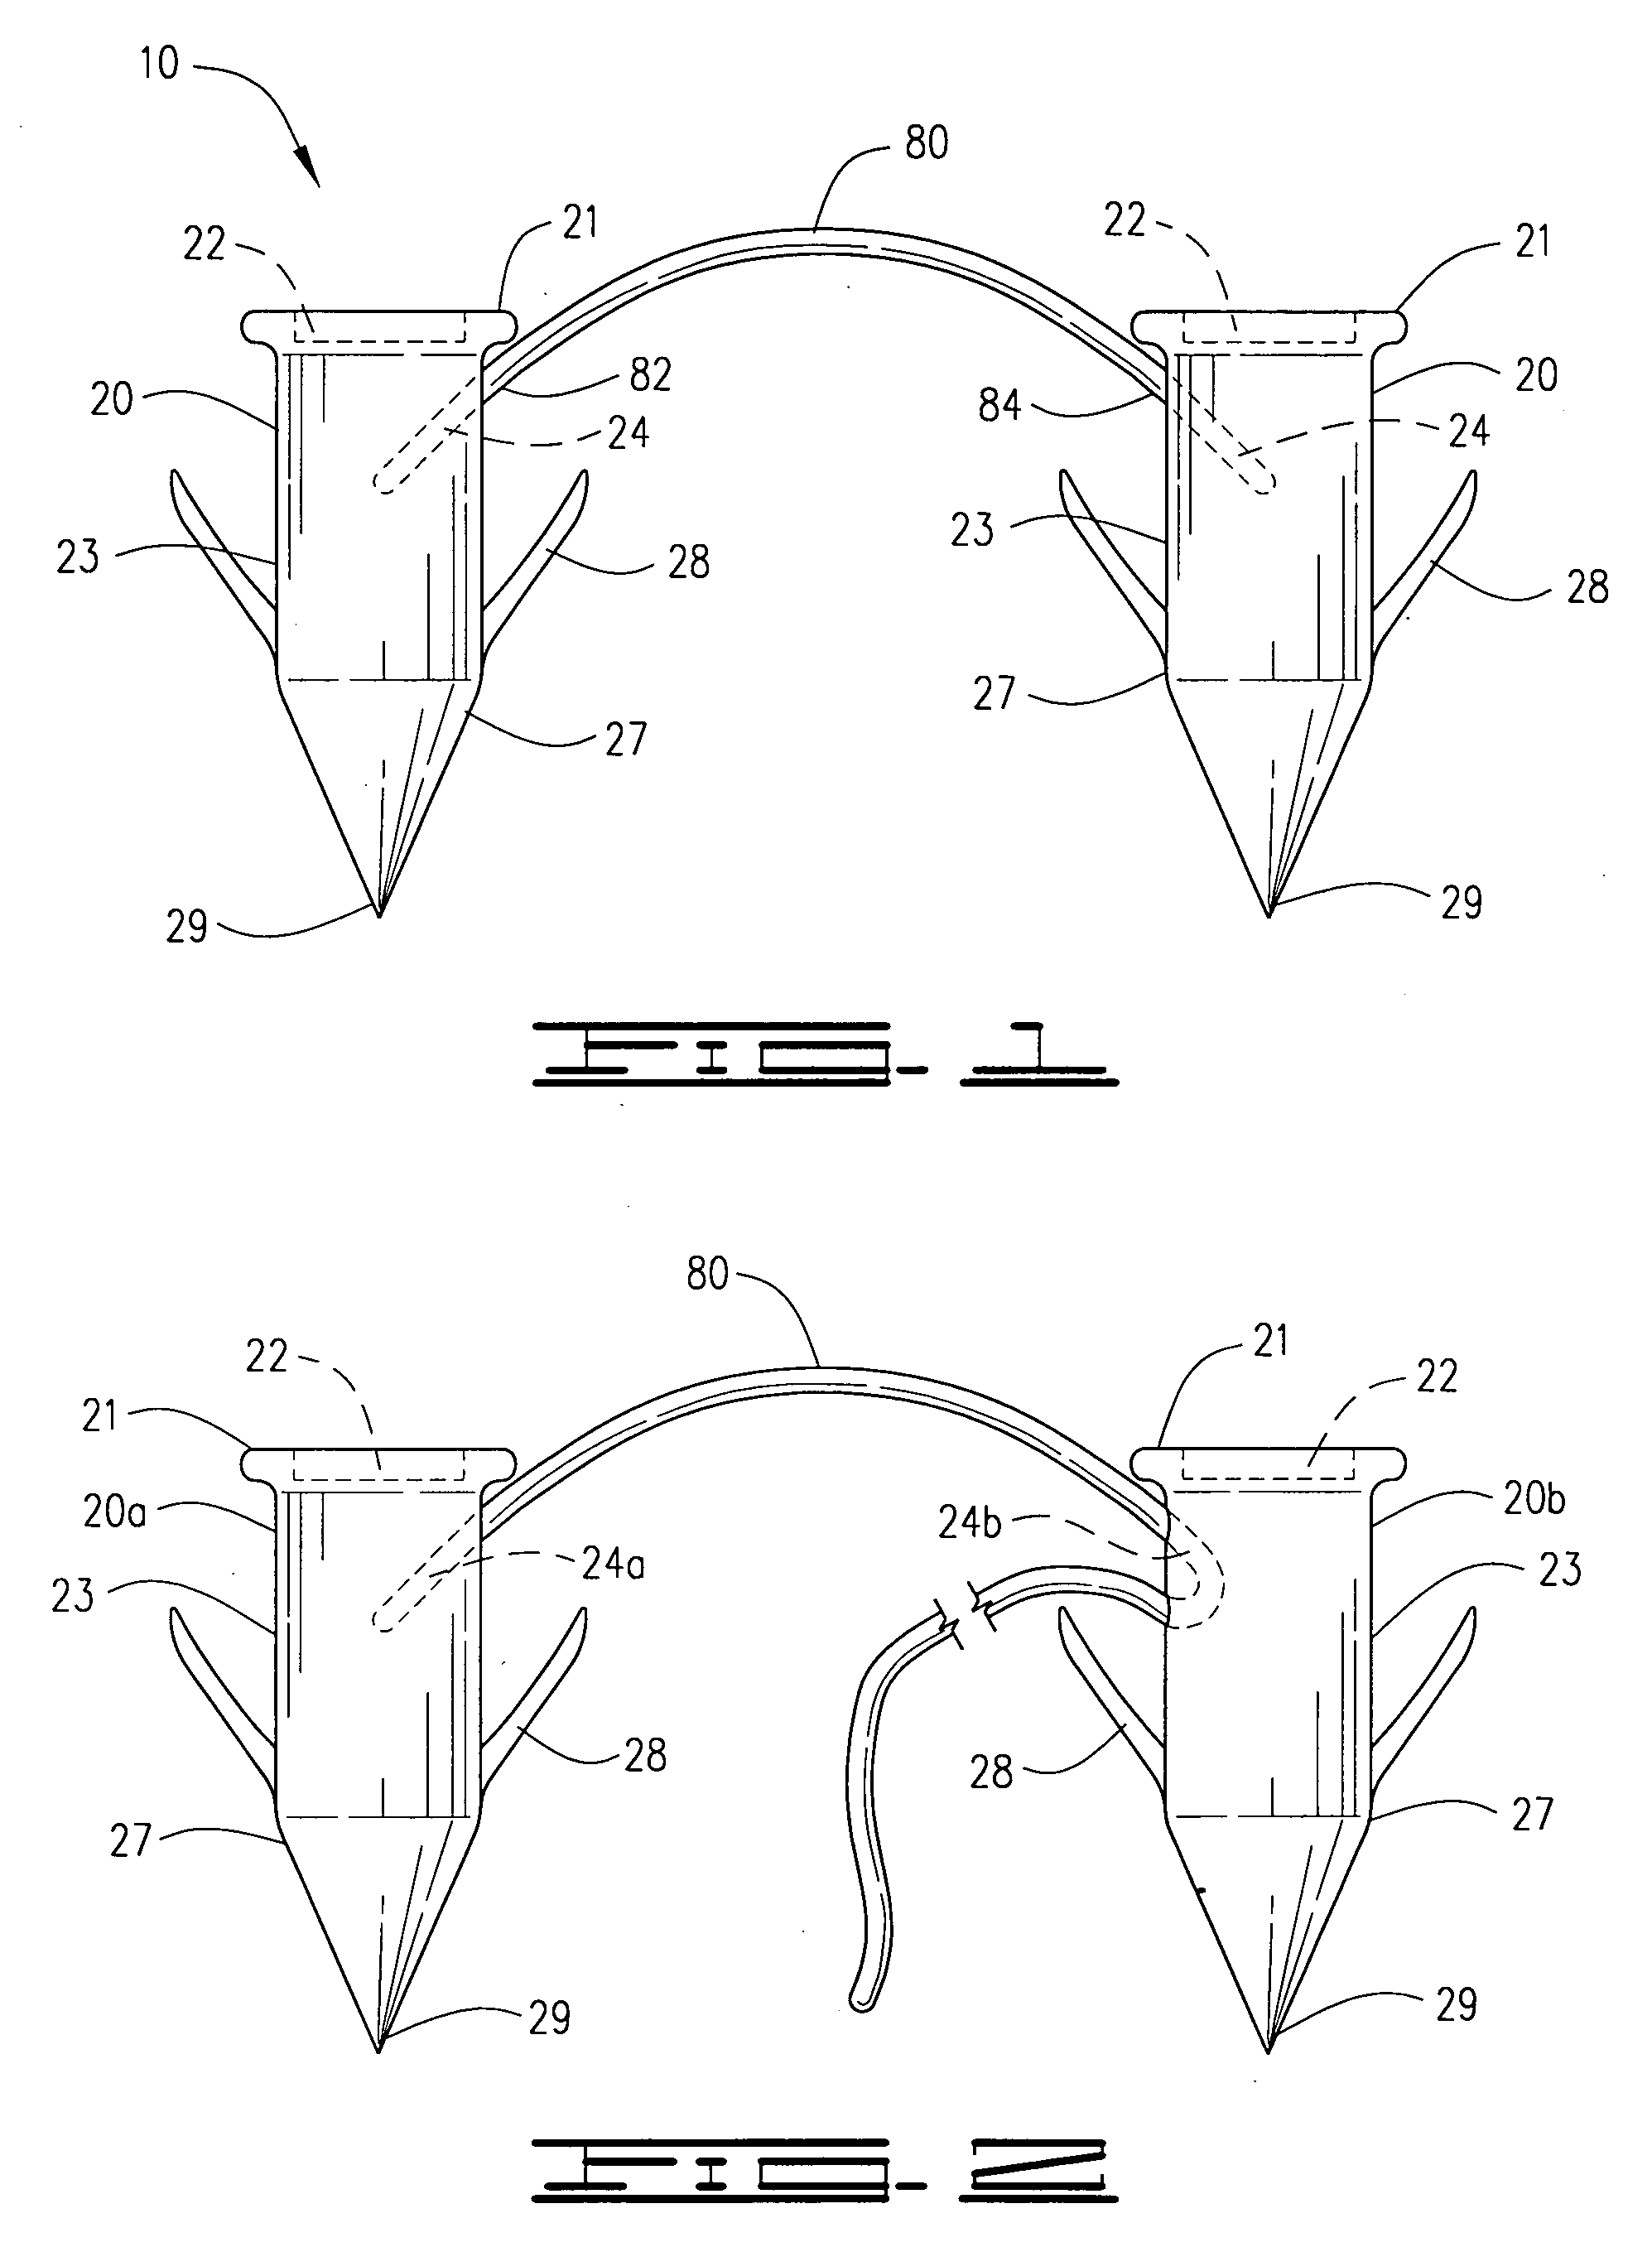 Surgical suture staple and attachment device for securing a soft tissue to a bone